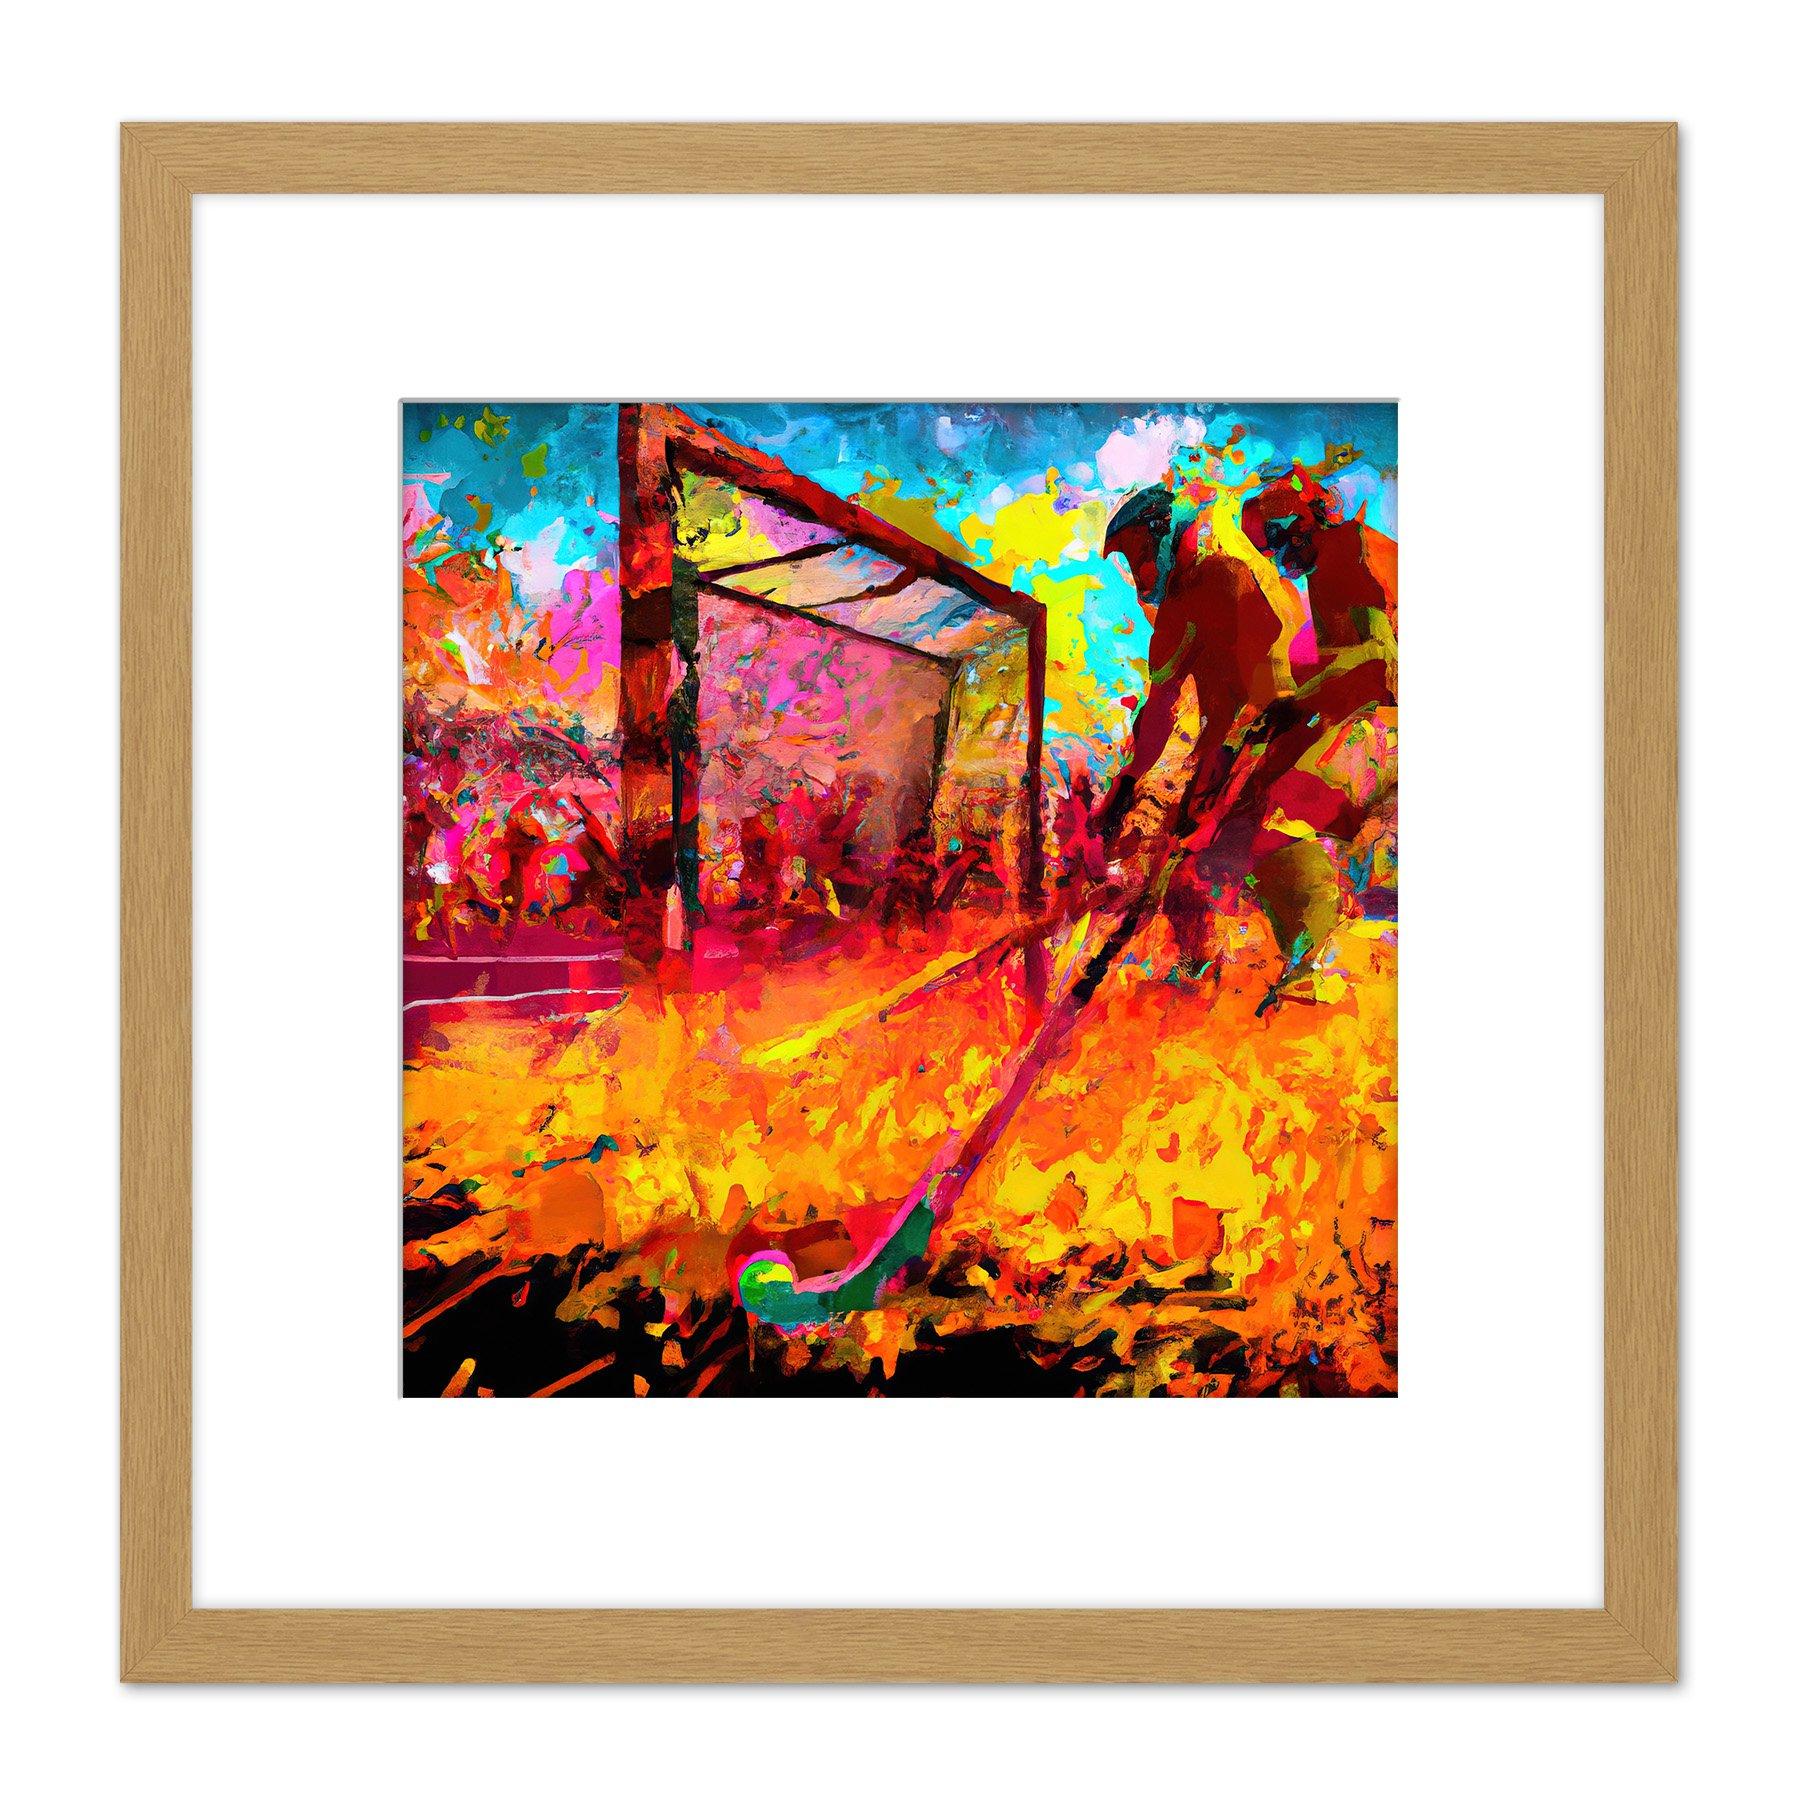 Field Hockey Game Abstract Vibrant Colourful Oil Painting Square Wooden Framed Wall Art Print Picture 8X8 Inch